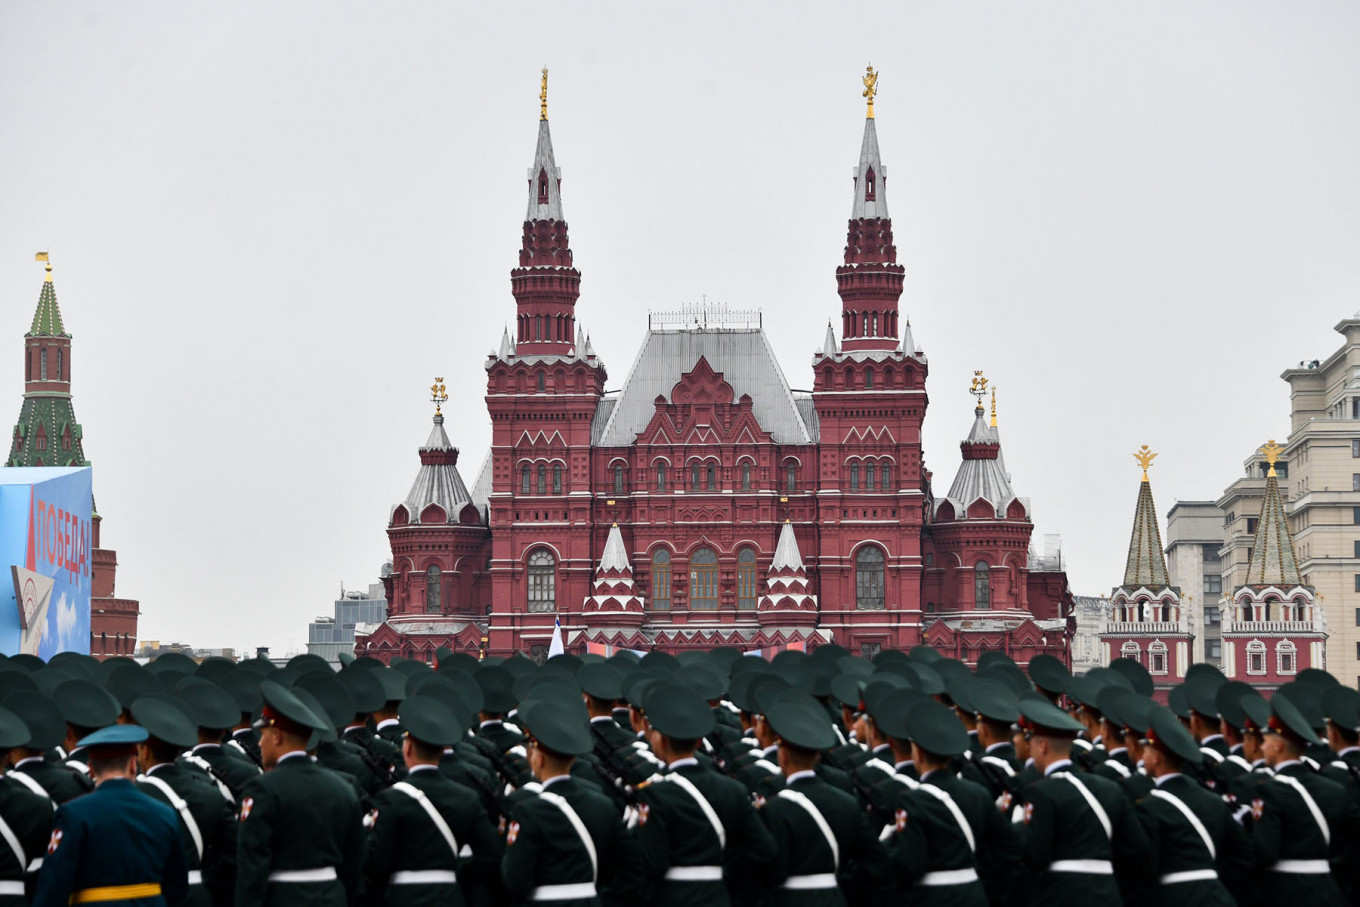 Russian Military Parade Red Square